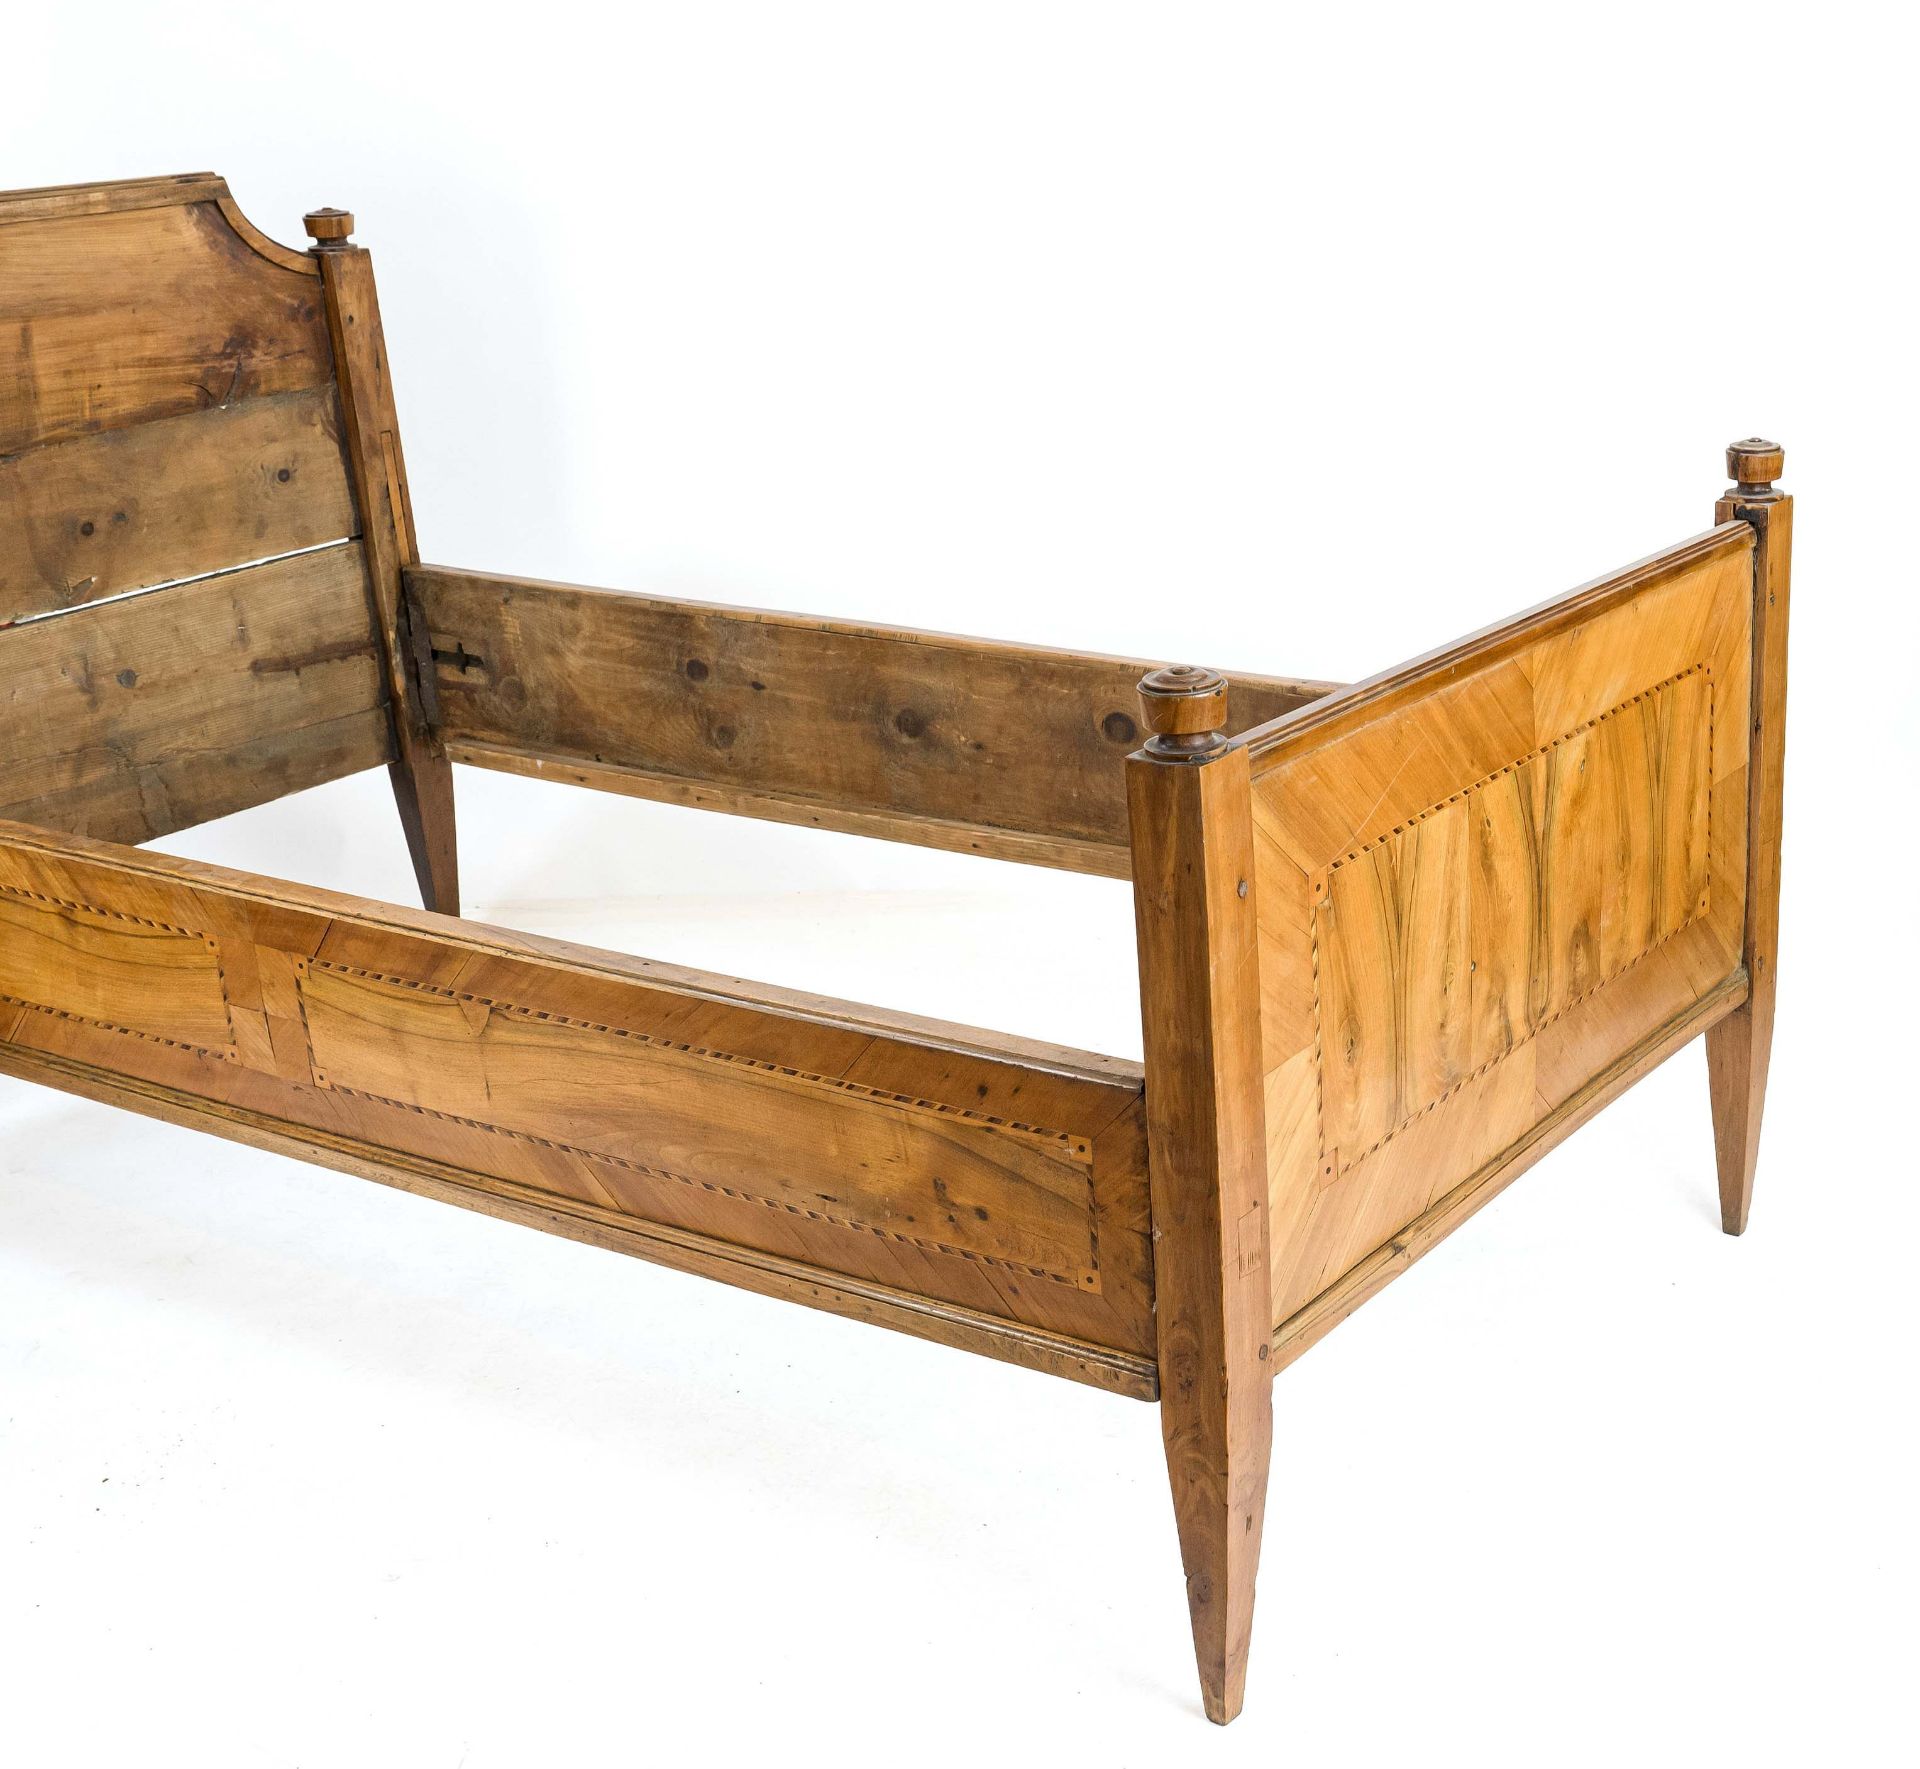 Bed, late 18th century, walnut with ribbon inlay, 94 x 200 x 92 cm - The furniture can only be - Image 2 of 2